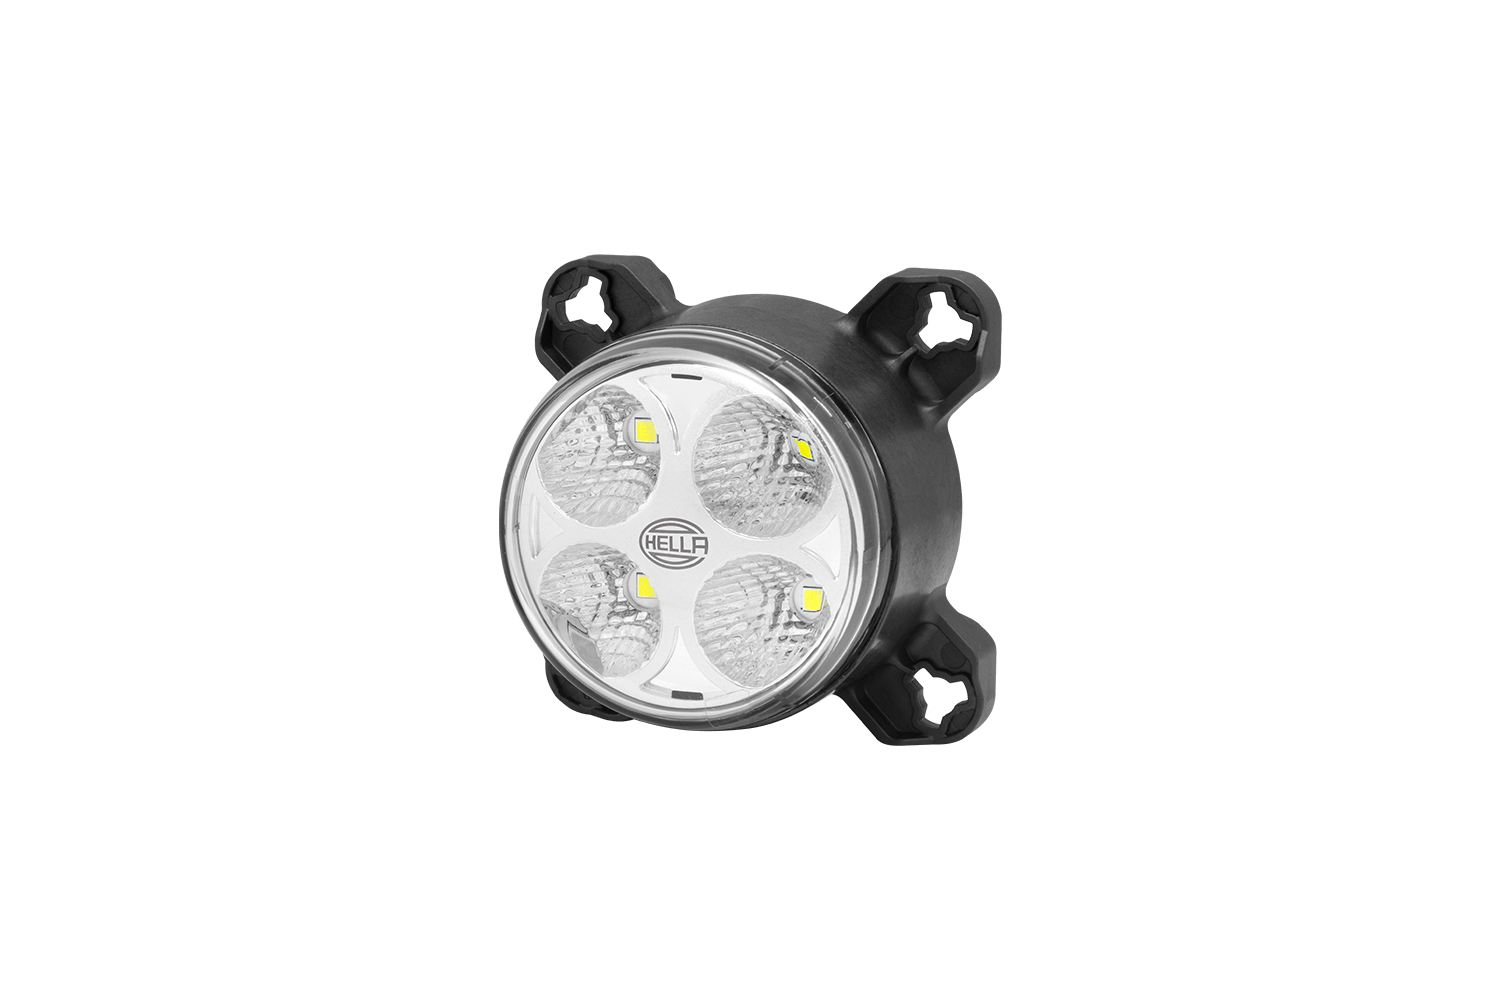 Module 90 S-series work lamps from Hella offered by Patlon